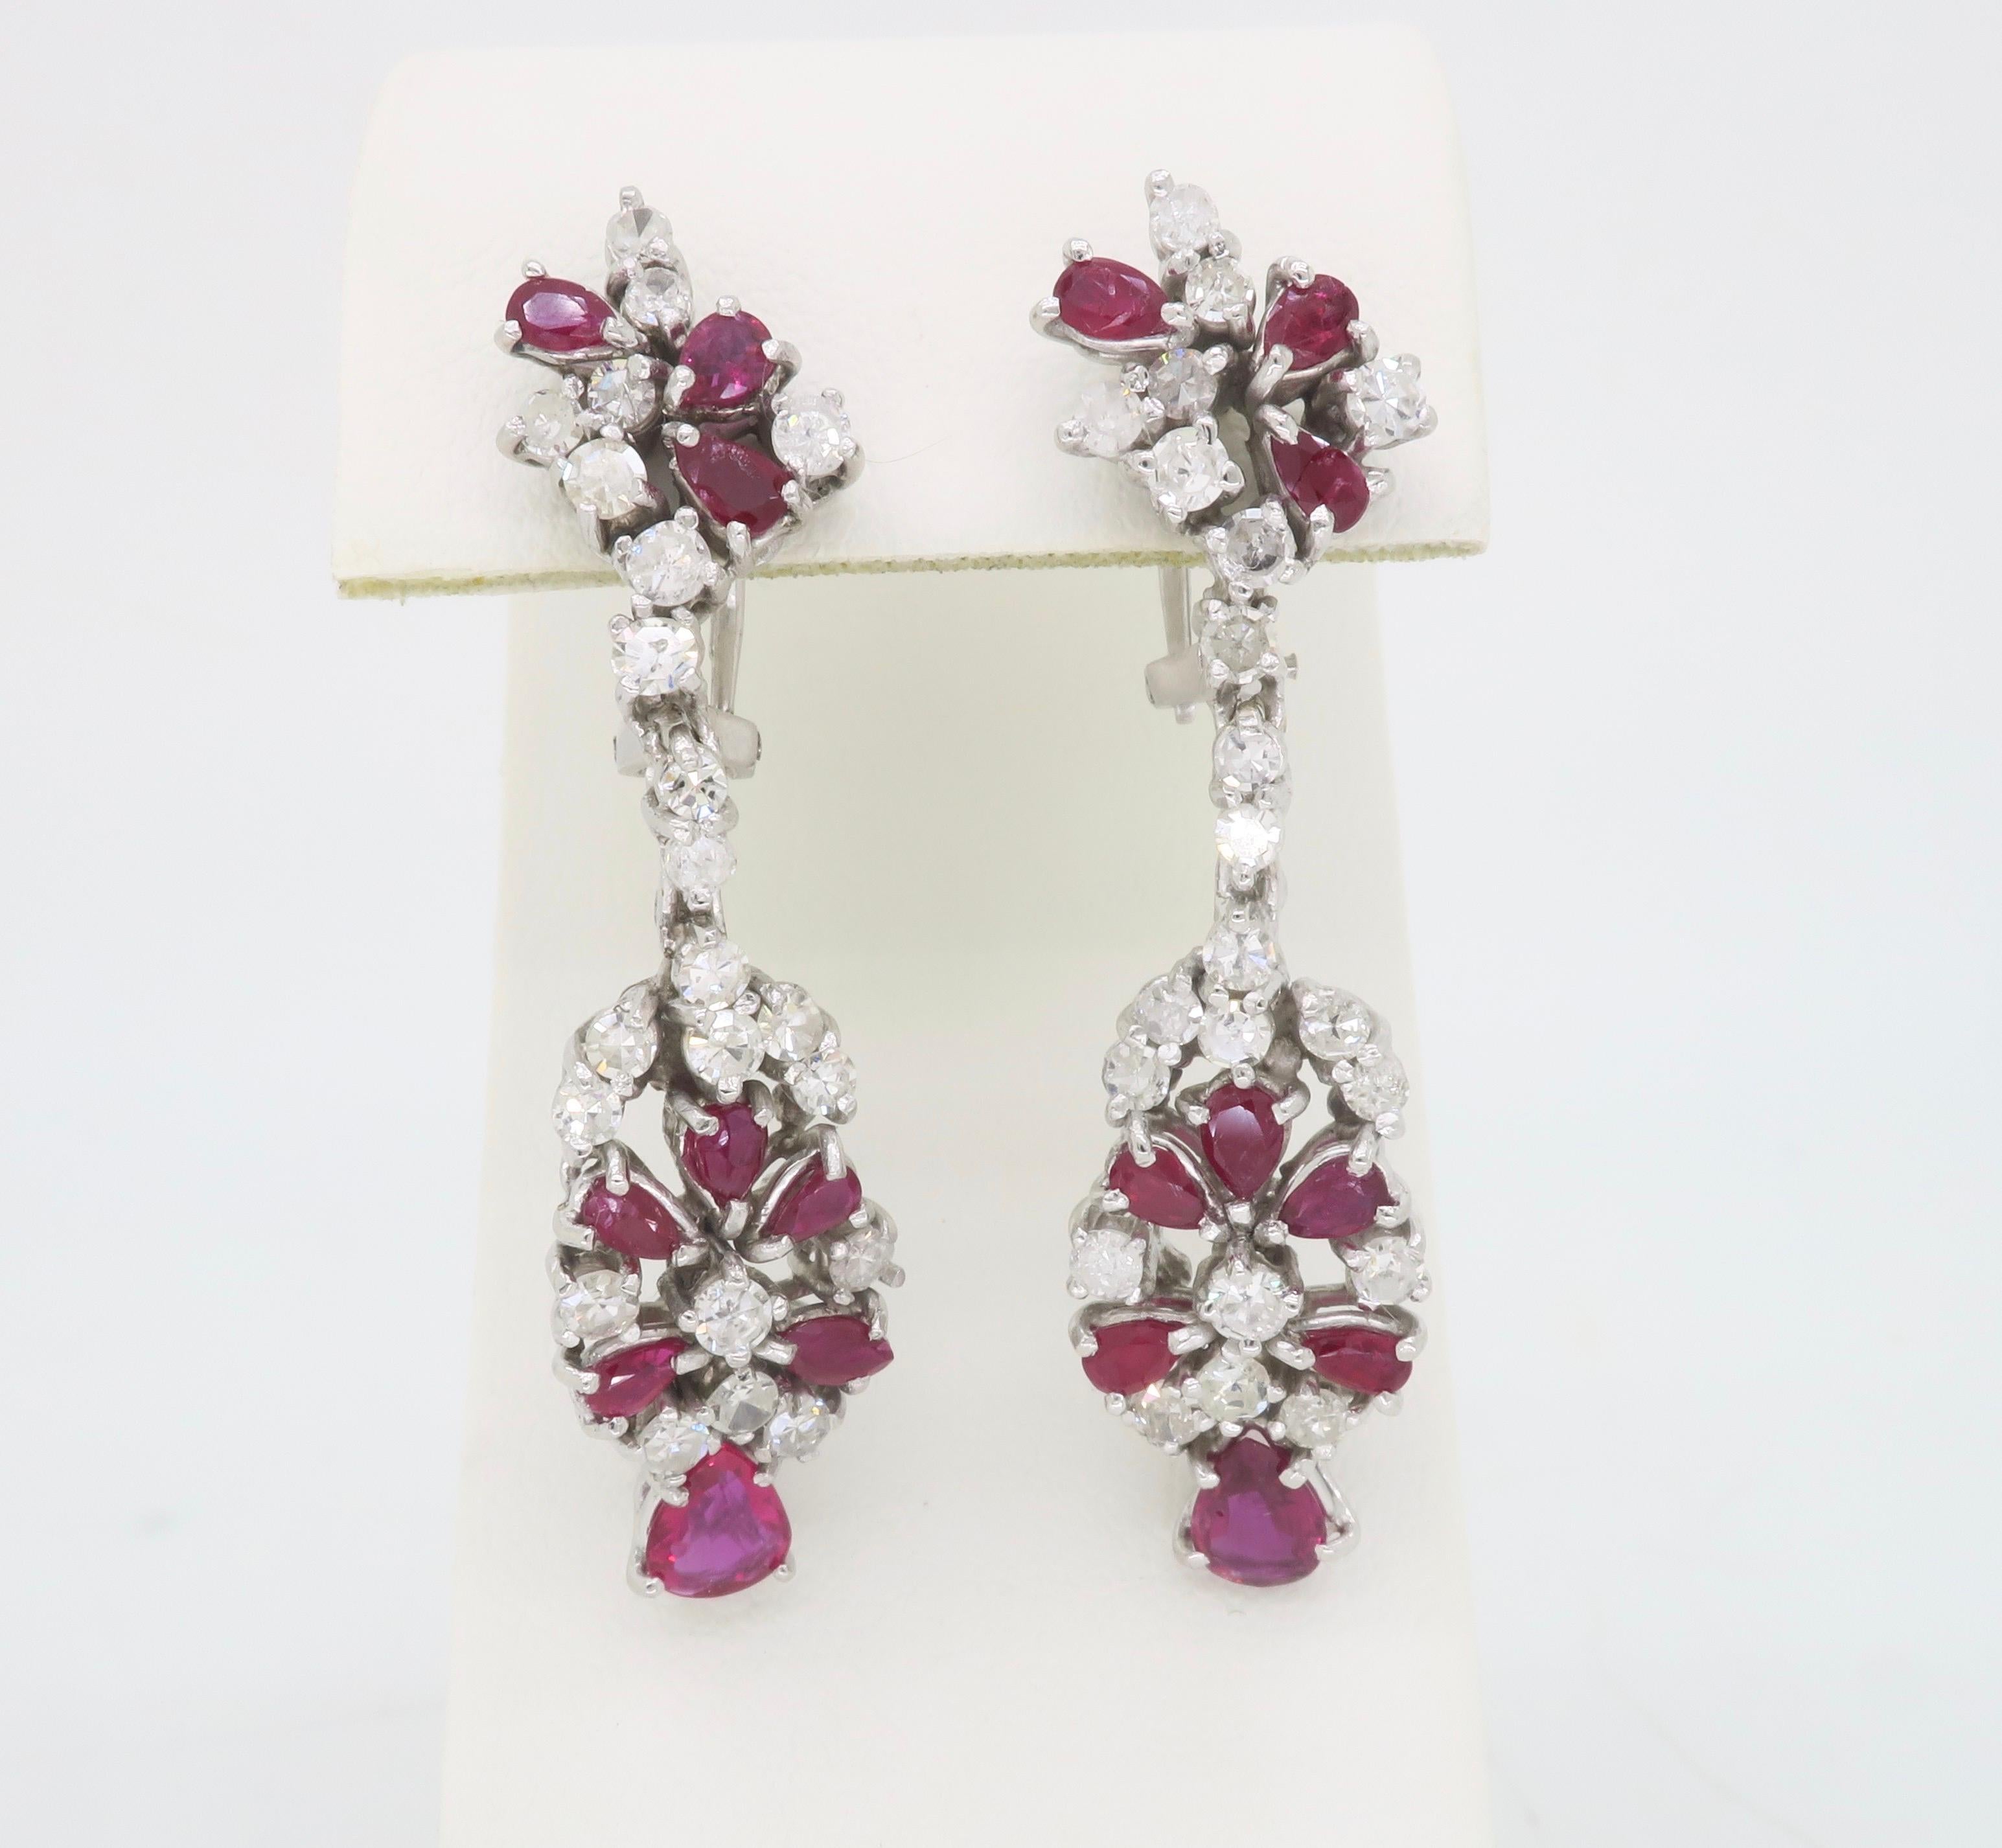 Vintage Ruby & Diamond drop chandelier earrings made in 18k white gold. 

Gemstone:  Diamond and Ruby
Gemstone Weight: Approximately 4.20ctw Ruby
Diamond Cut: Round Cut Diamonds
Diamond Carat Weight: 1.95CTW
Diamond Color: Average F-H
Diamond